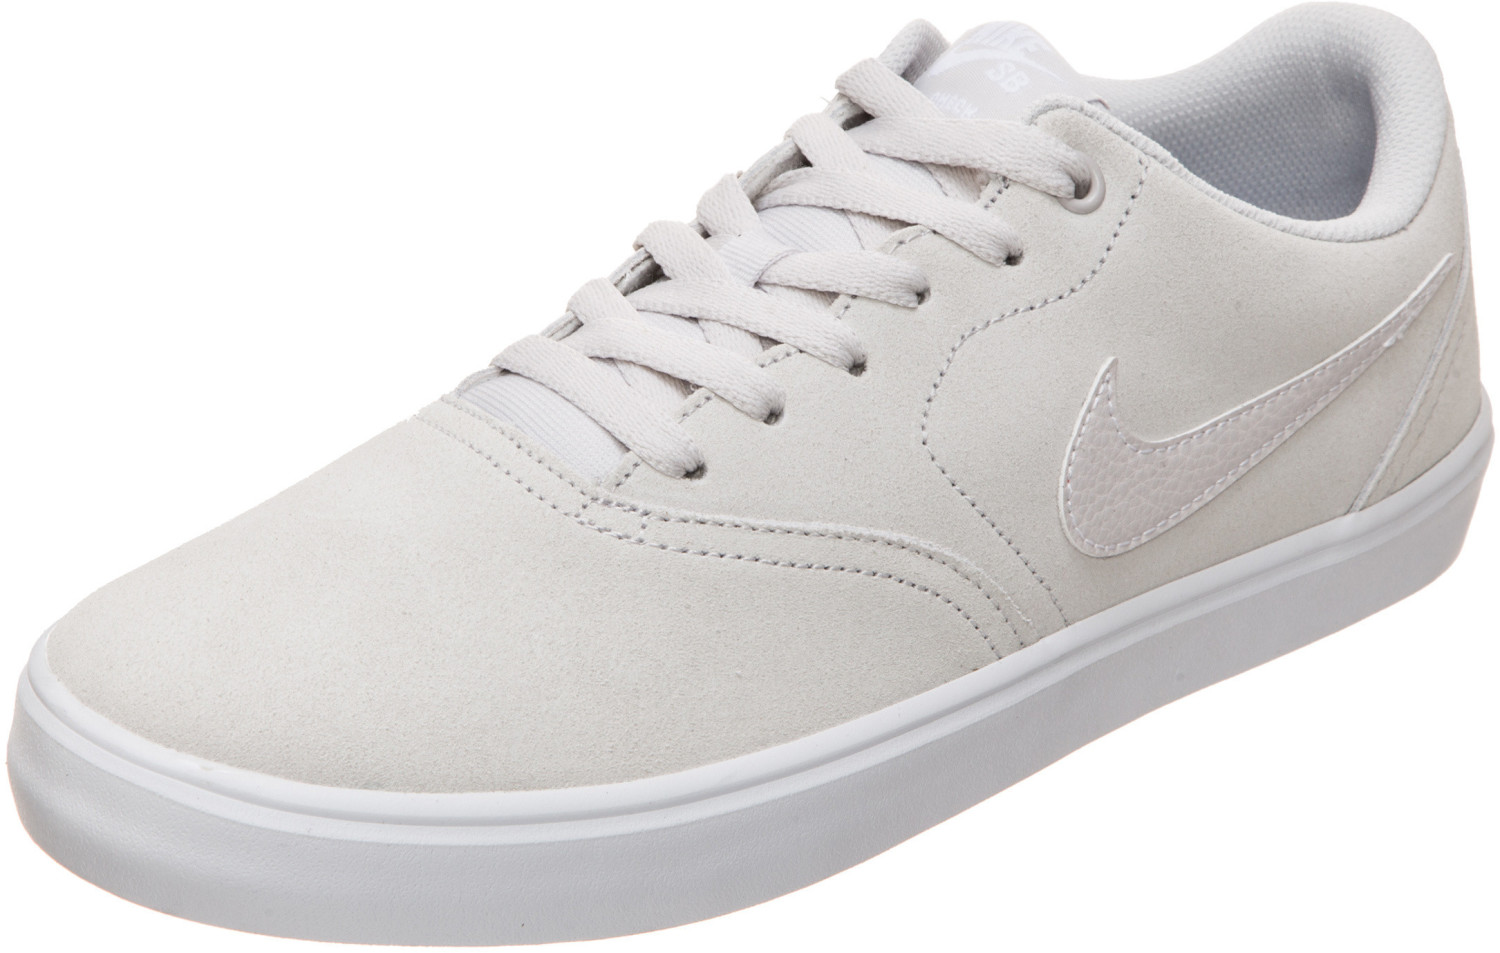 Buy Nike SB Check Solarsoft (843895-007) from £104.00 (Today) – Best ...